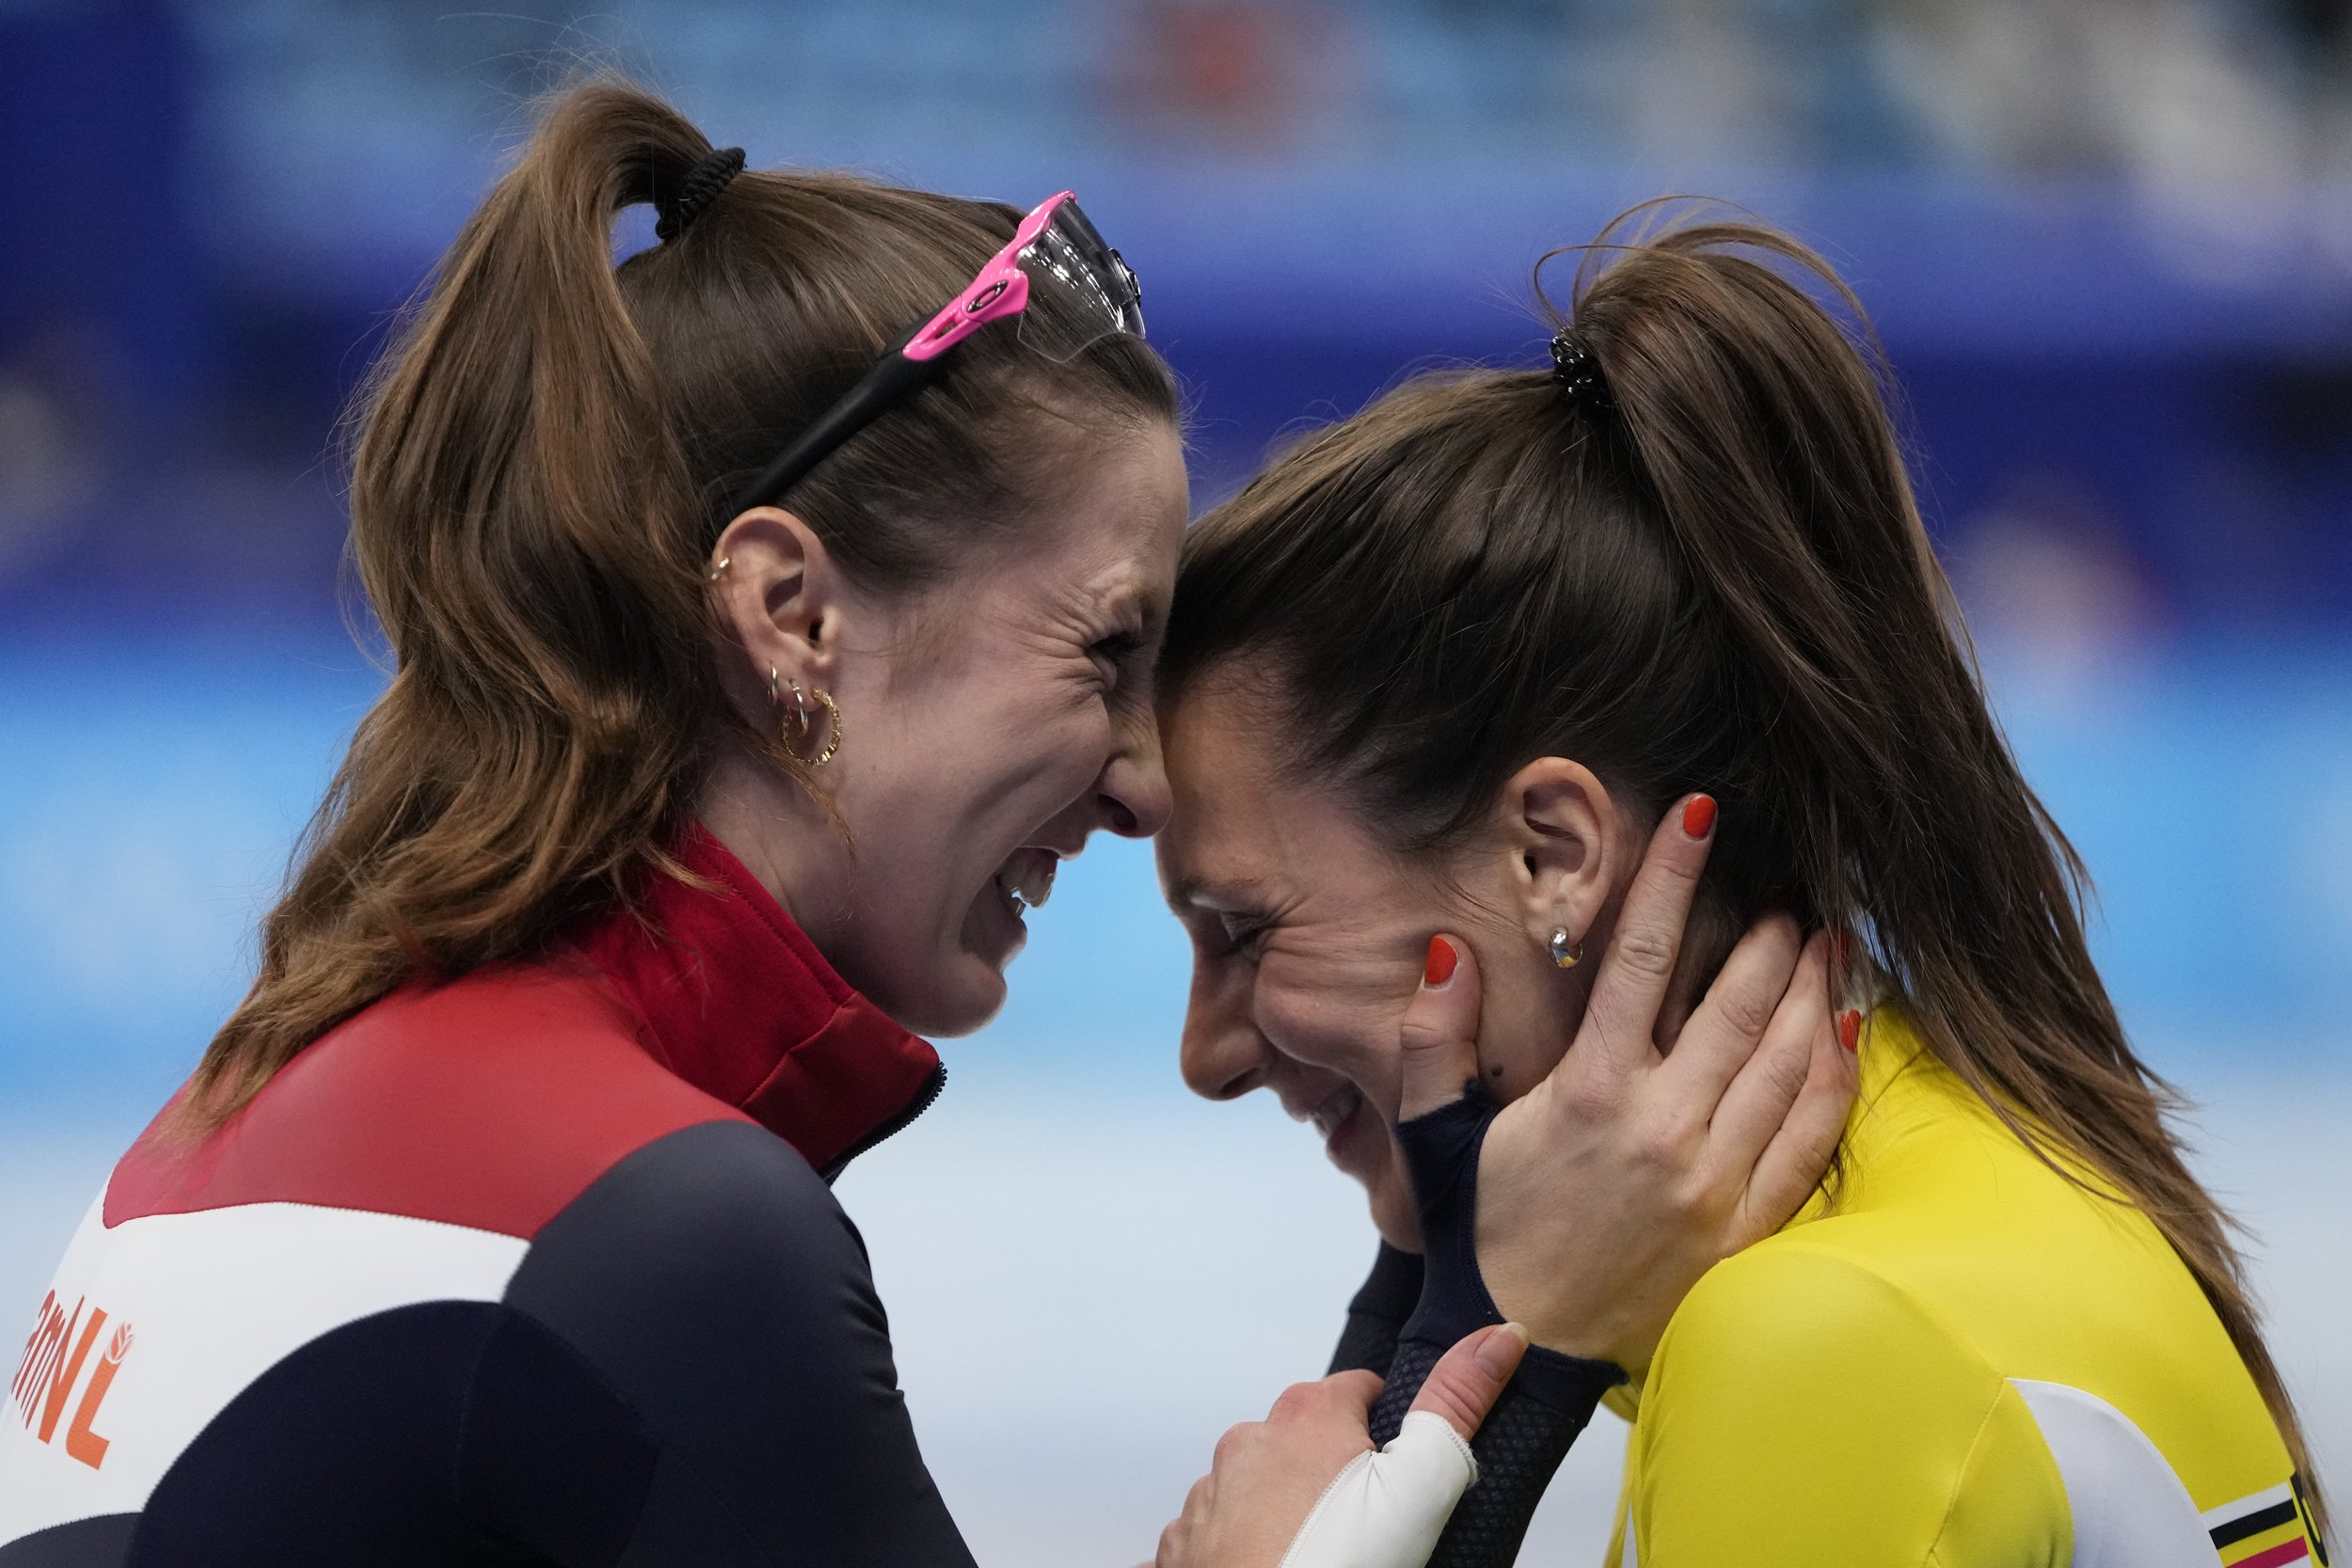  Suzanne Schulting, left, of the Netherlands, embraces Hanne Desmet of Belgium, after winning the women's 1000-meters during the short track speedskating competition at the 2022 Winter Olympics, Friday, Feb. 11, 2022, in Beijing. (AP Photo/Natacha Pi